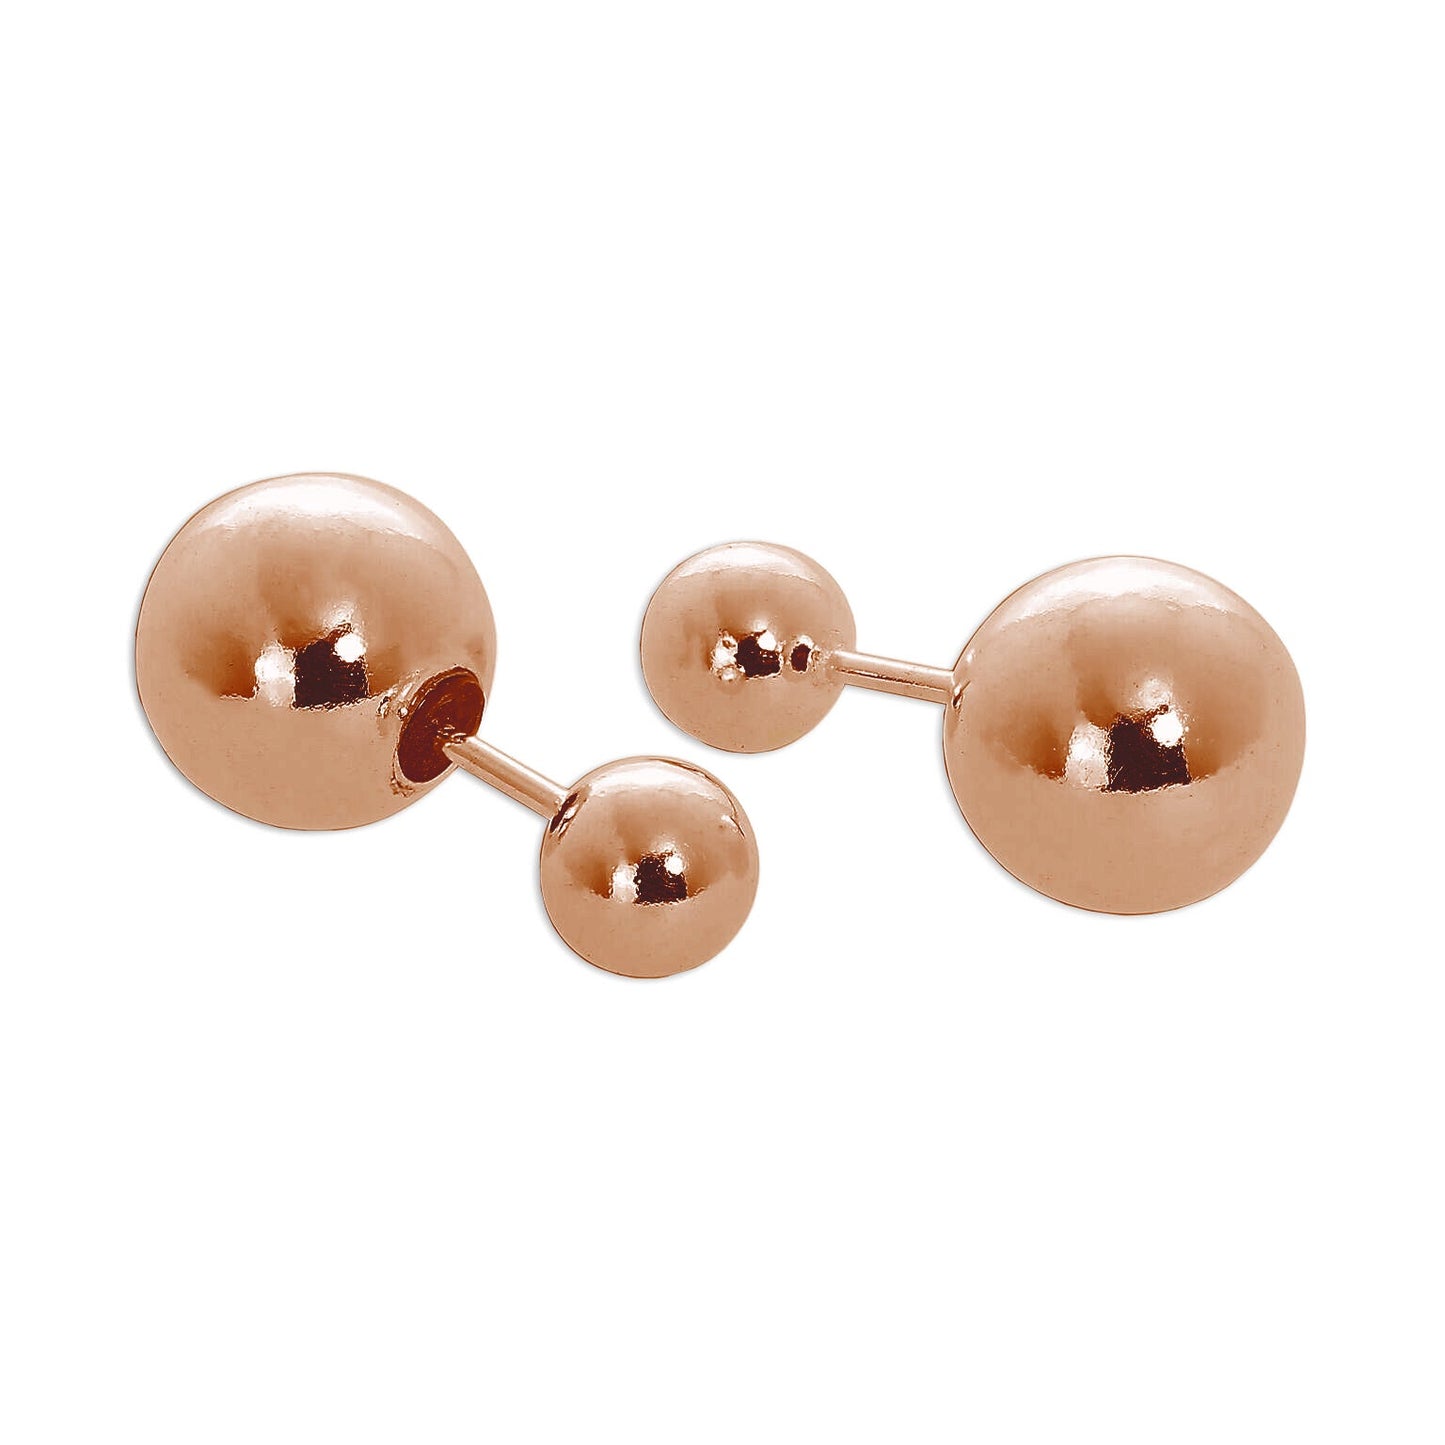 Rose Gold Plated Sterling Silver Double Sided 6mm Ball Stud Earrings